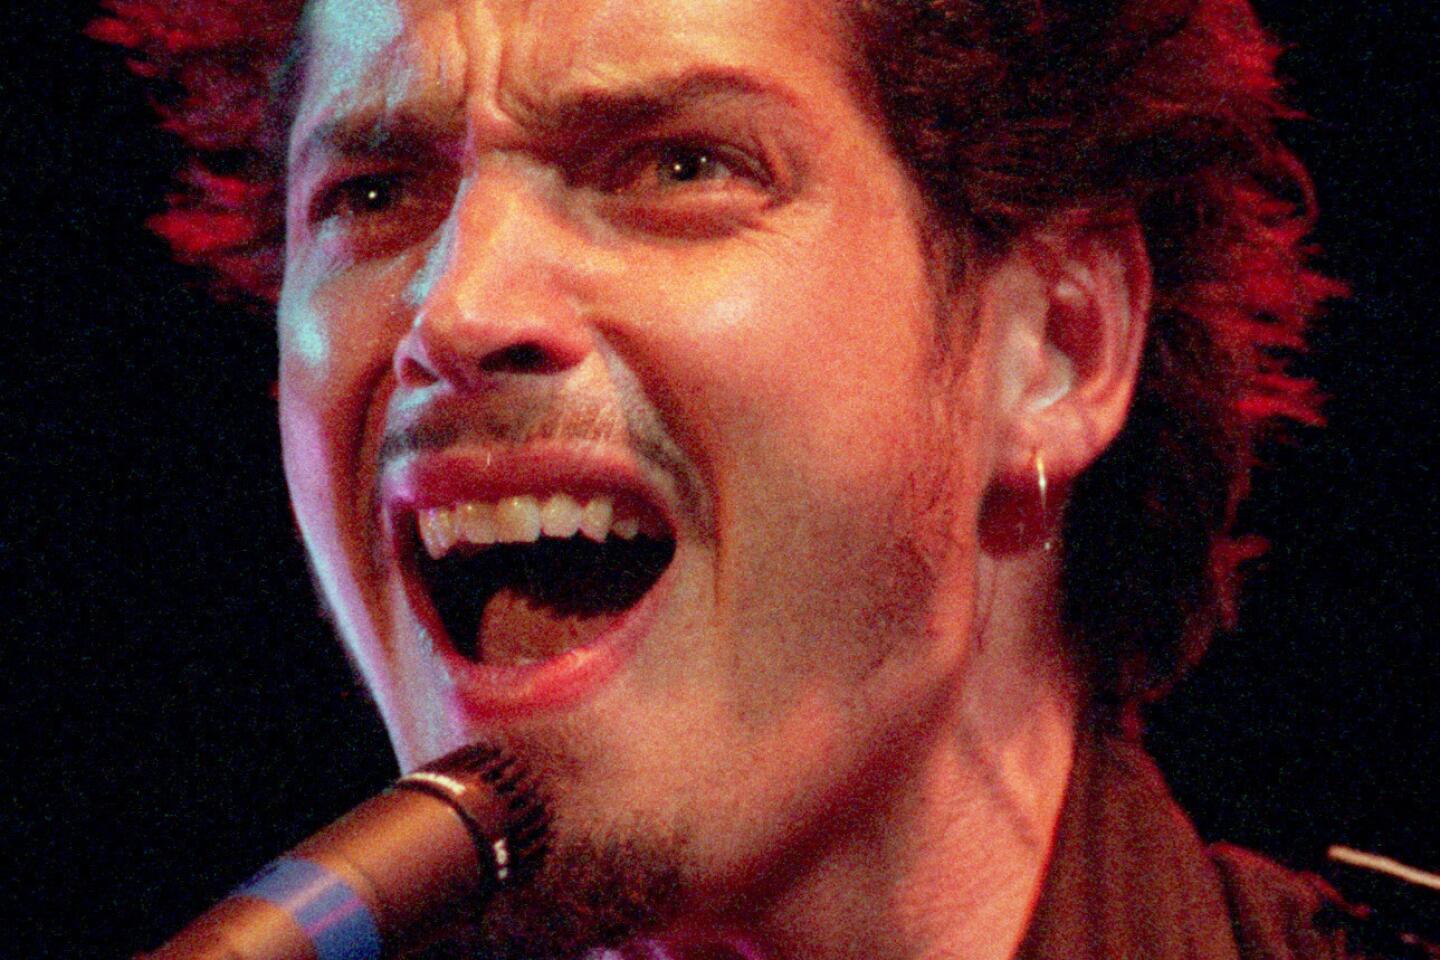 Chris Cornell, who helped reignite hard rock in the 1990s with